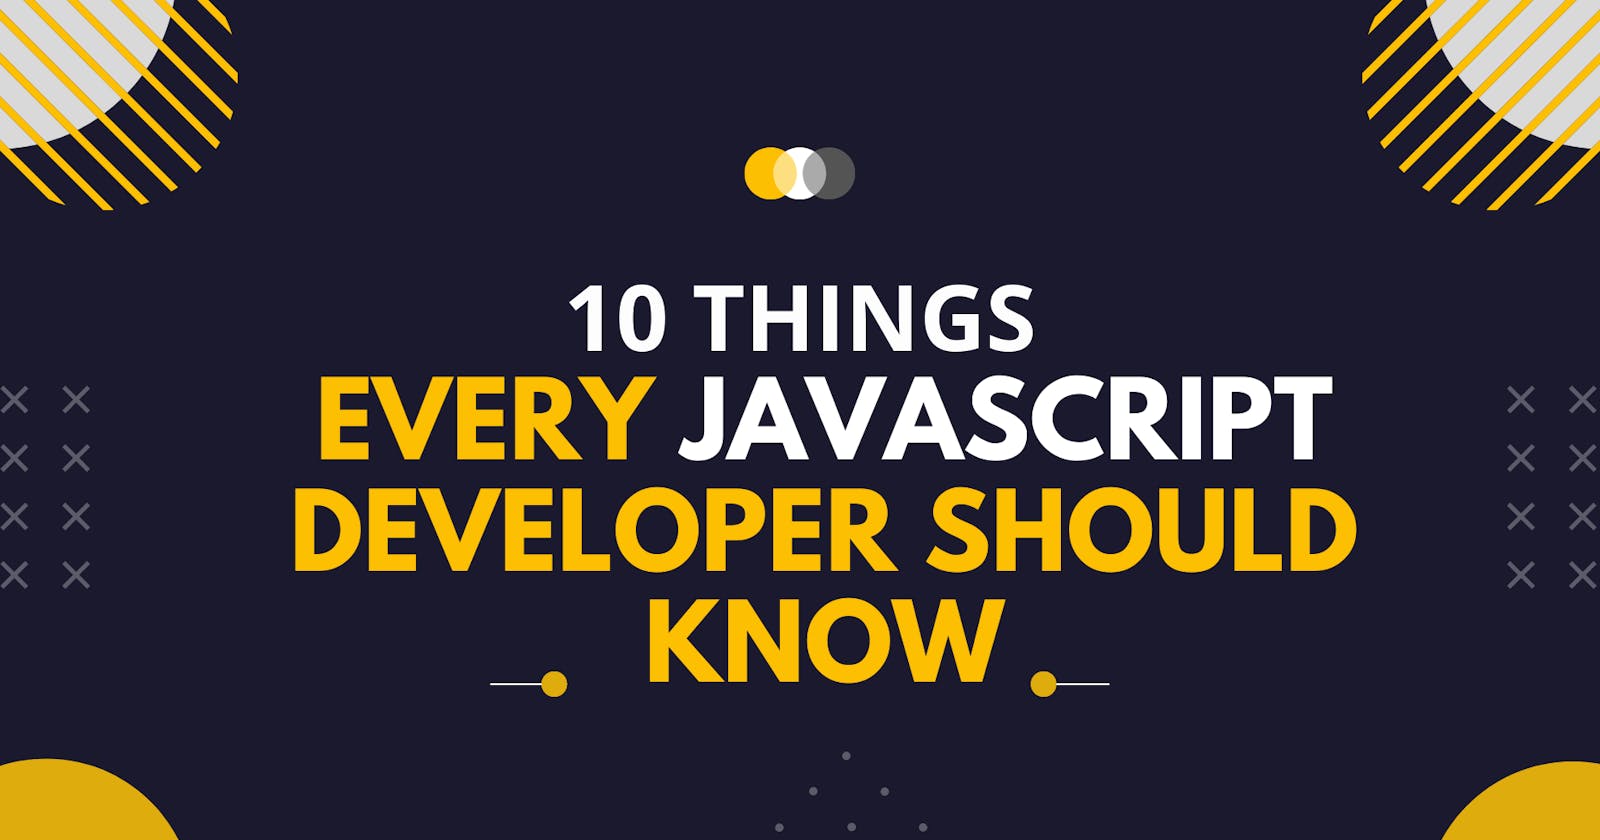 10 Things Every JavaScript Developer Should Know